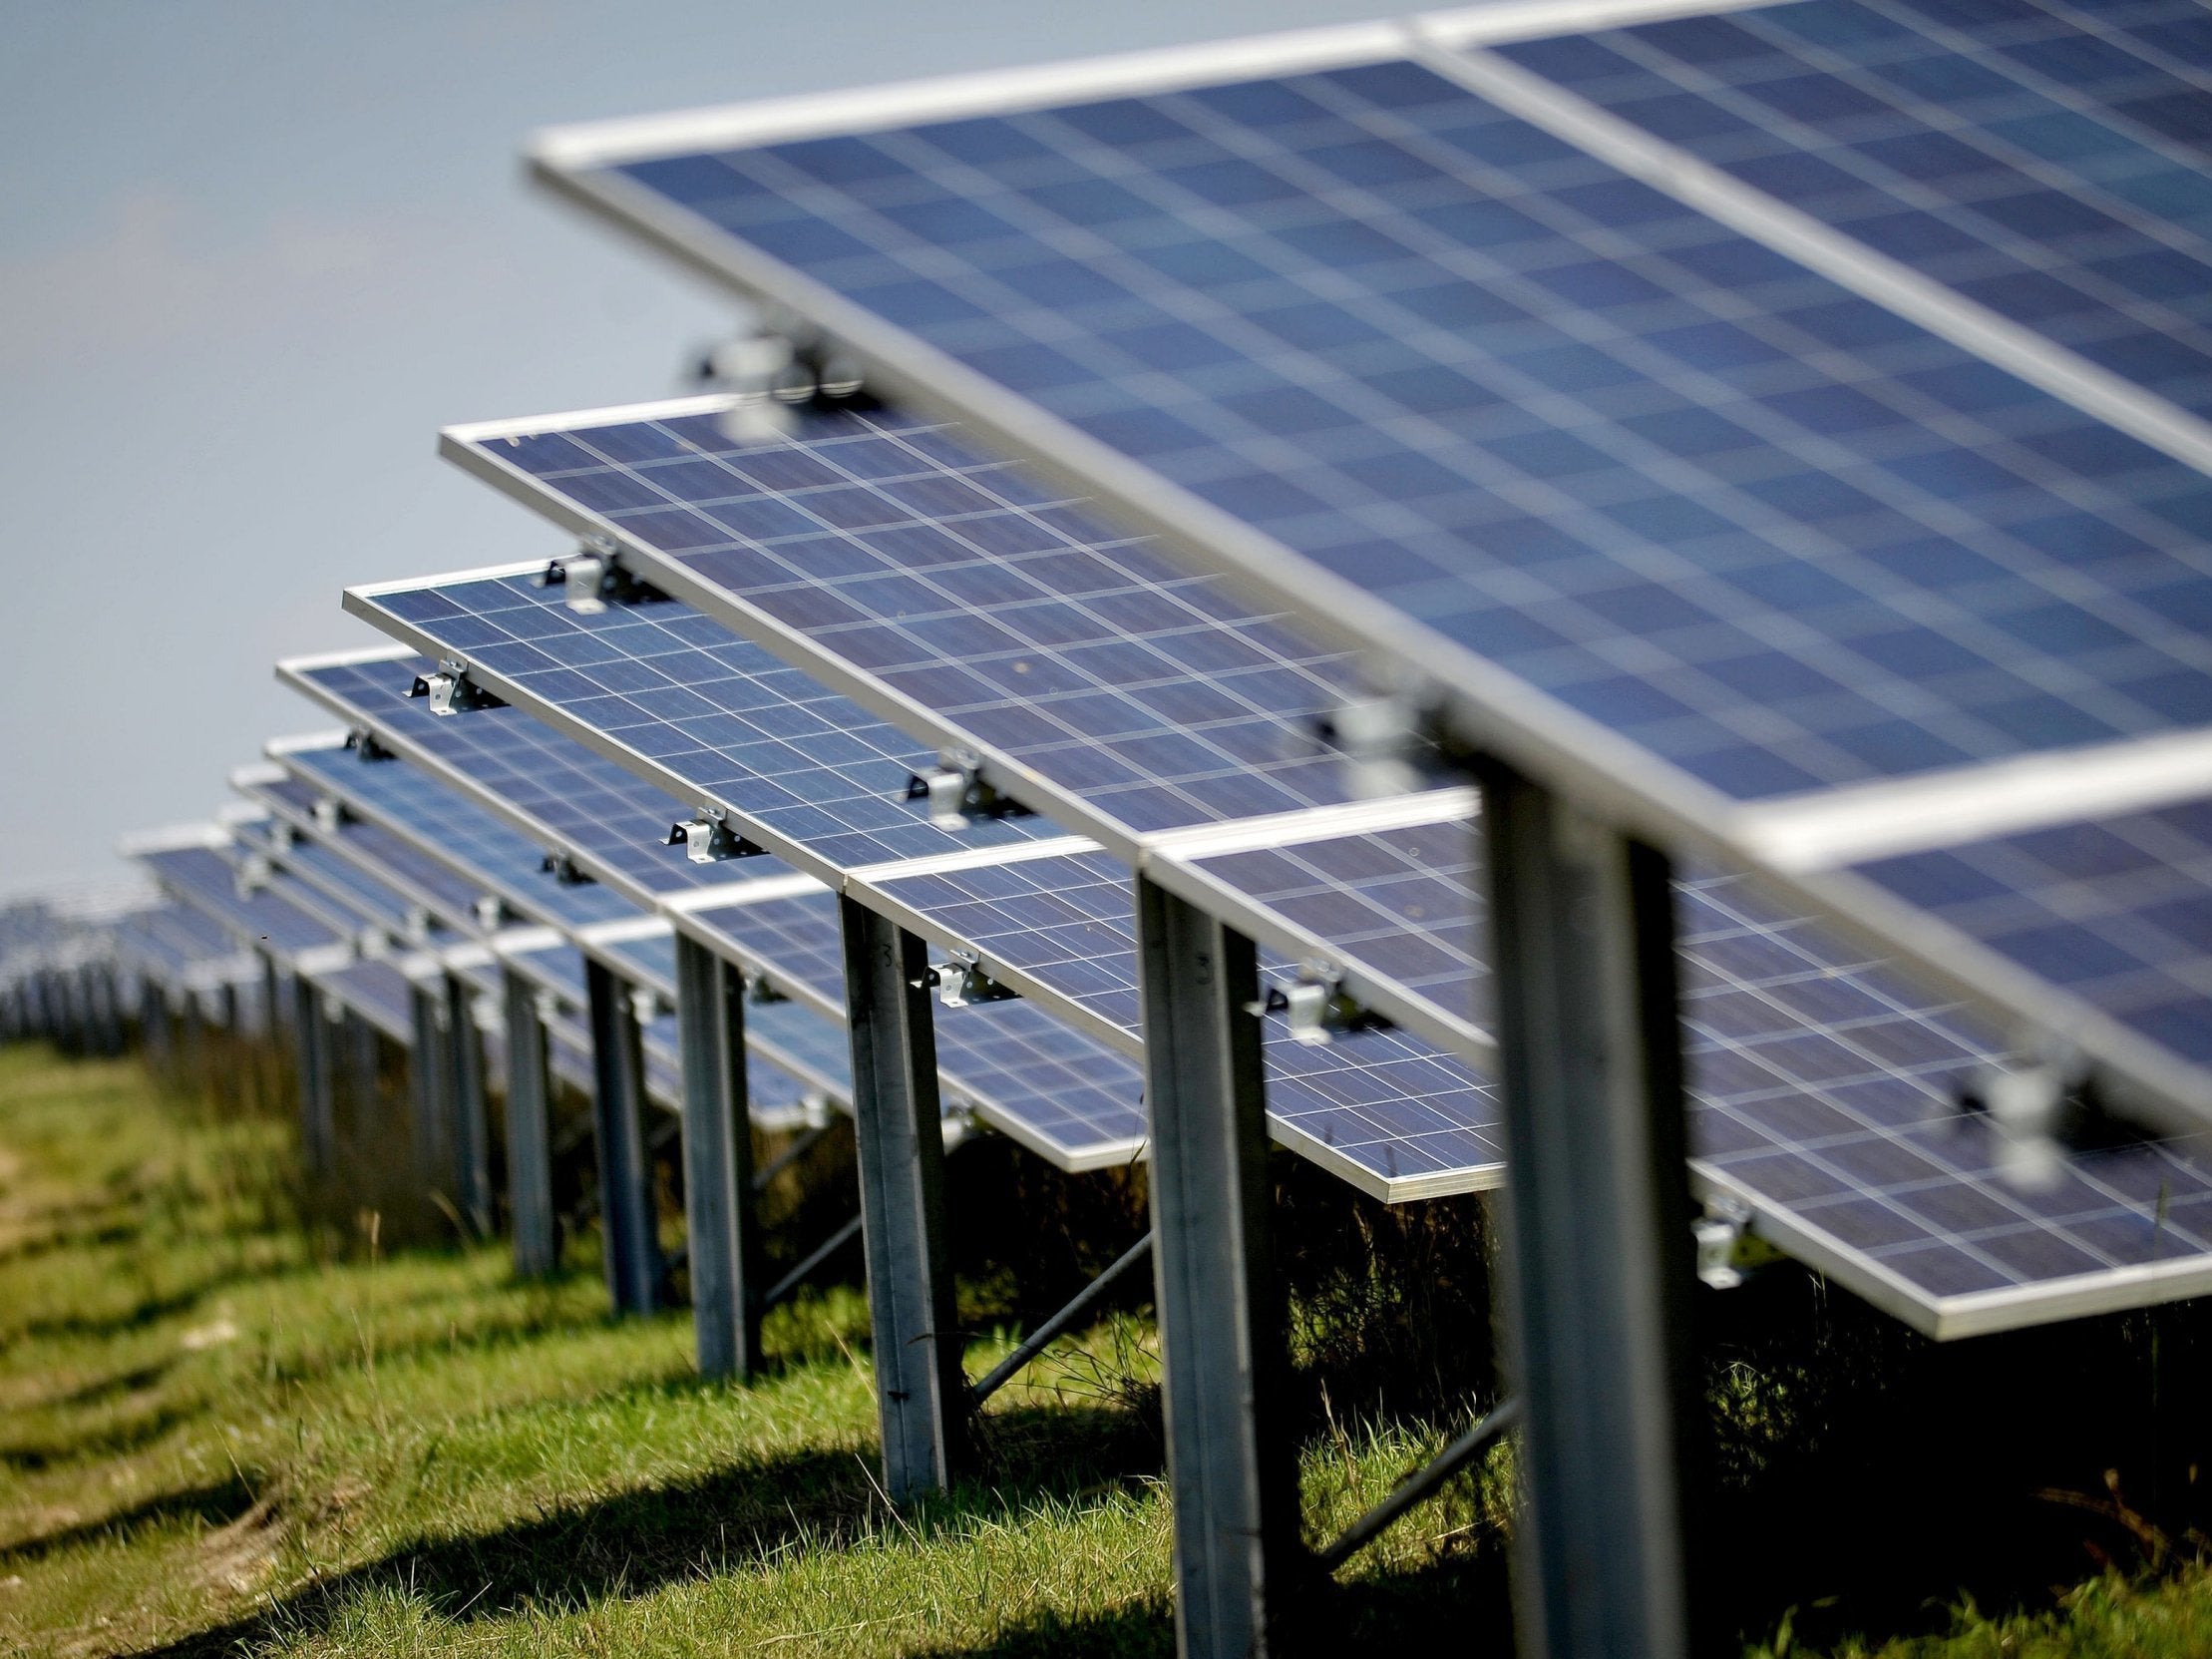 Steel is used for equipment needed to fix solar panels to the ground or roofs